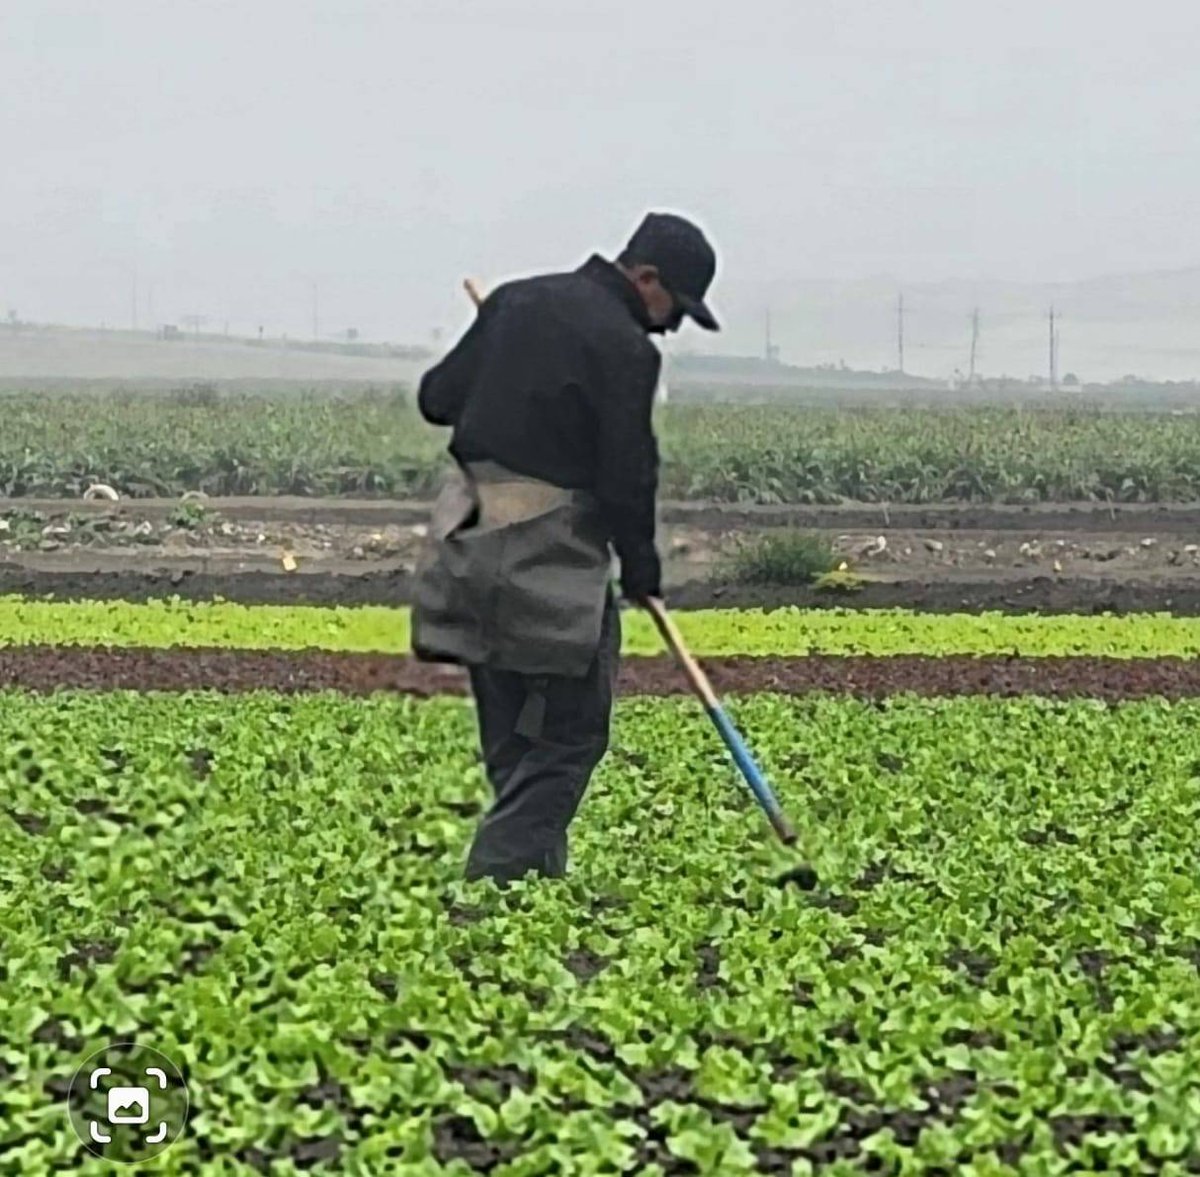 Jose works weeding the lettuce field in Soledad CA. His hands hurt from the repetitive motion of doing this 8 hours a day and his feet are tired from walking the long fields but as a farm worker he is proud of his honest work. The high today was 98°.  #WeFeedYou #CALOR